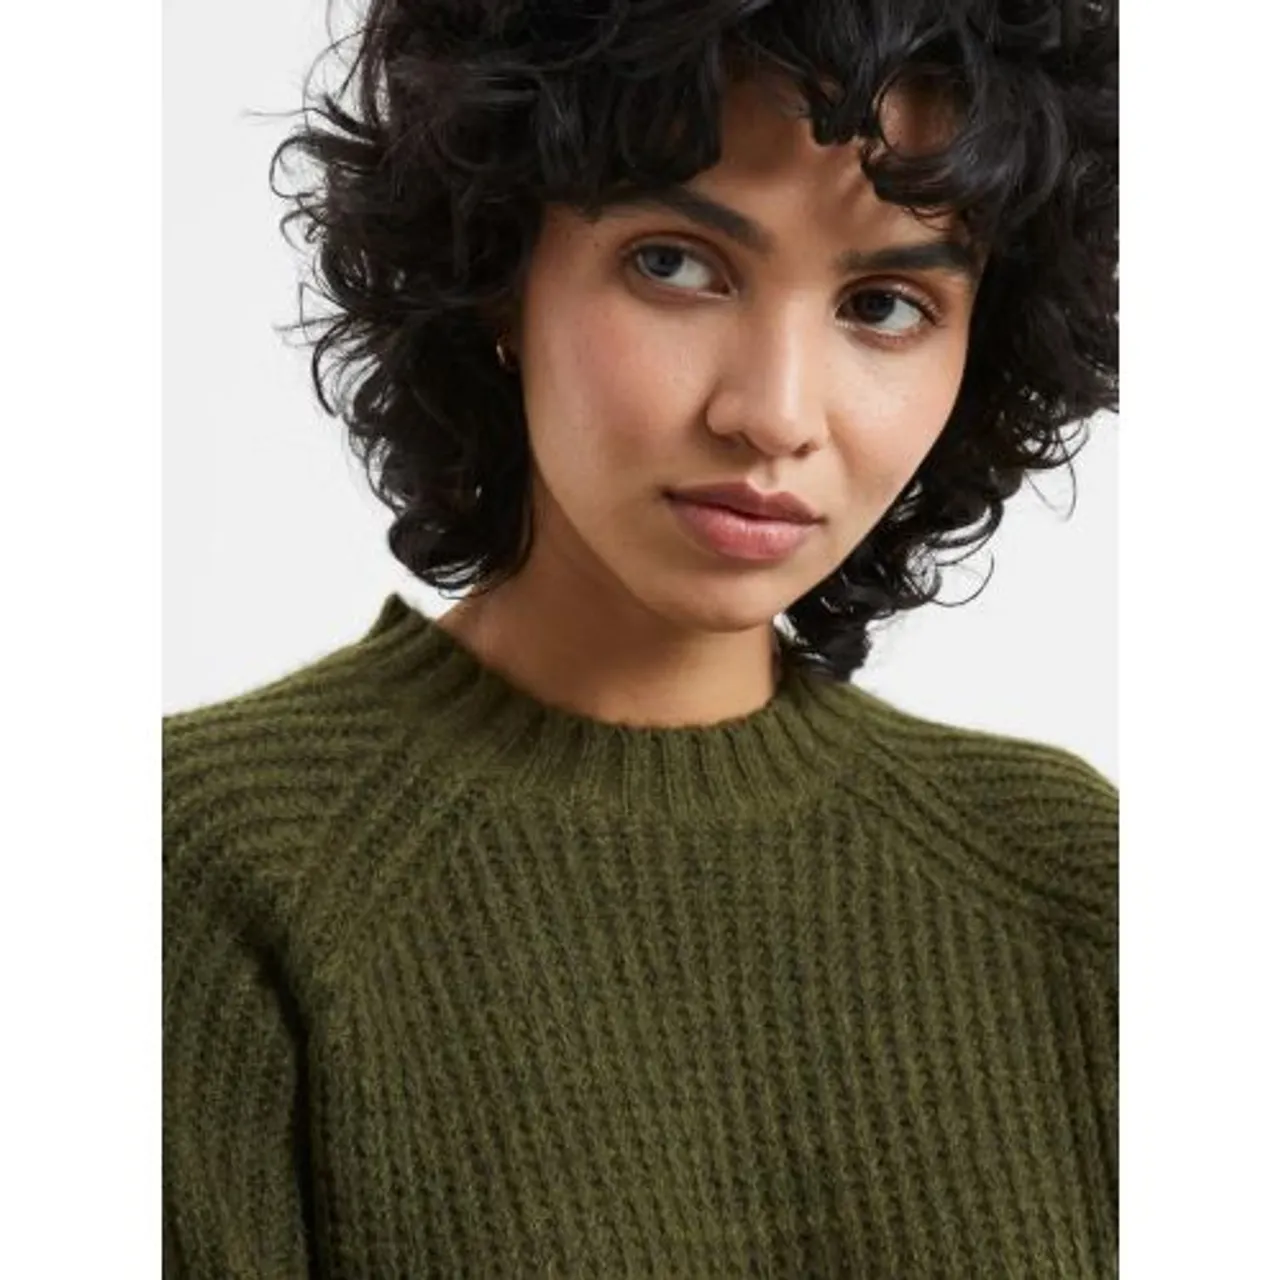 French Connection Womens Olive Night Jika Jumper